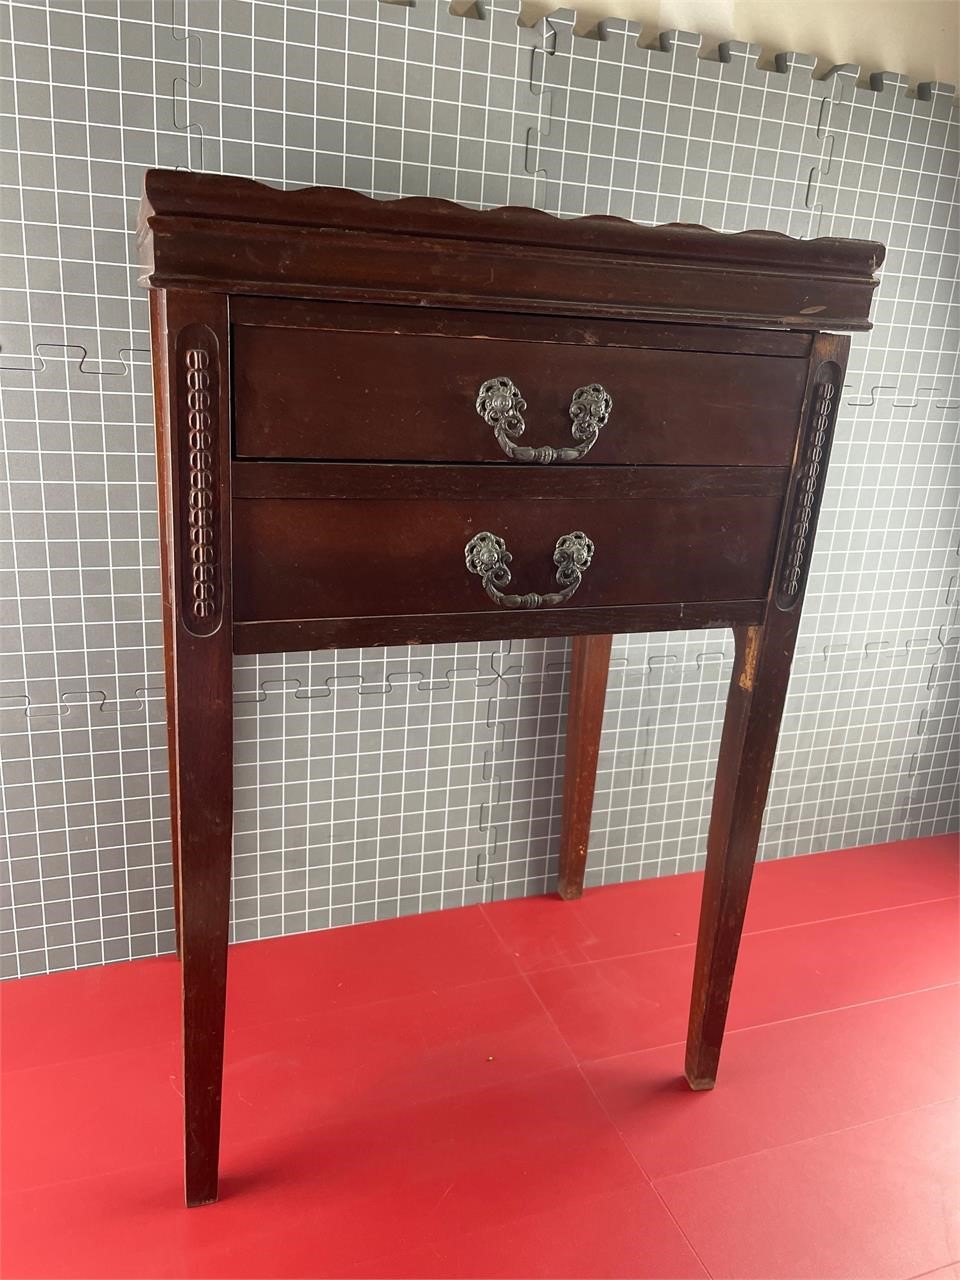 SOLID WOOD END TABLE ANTIQUE